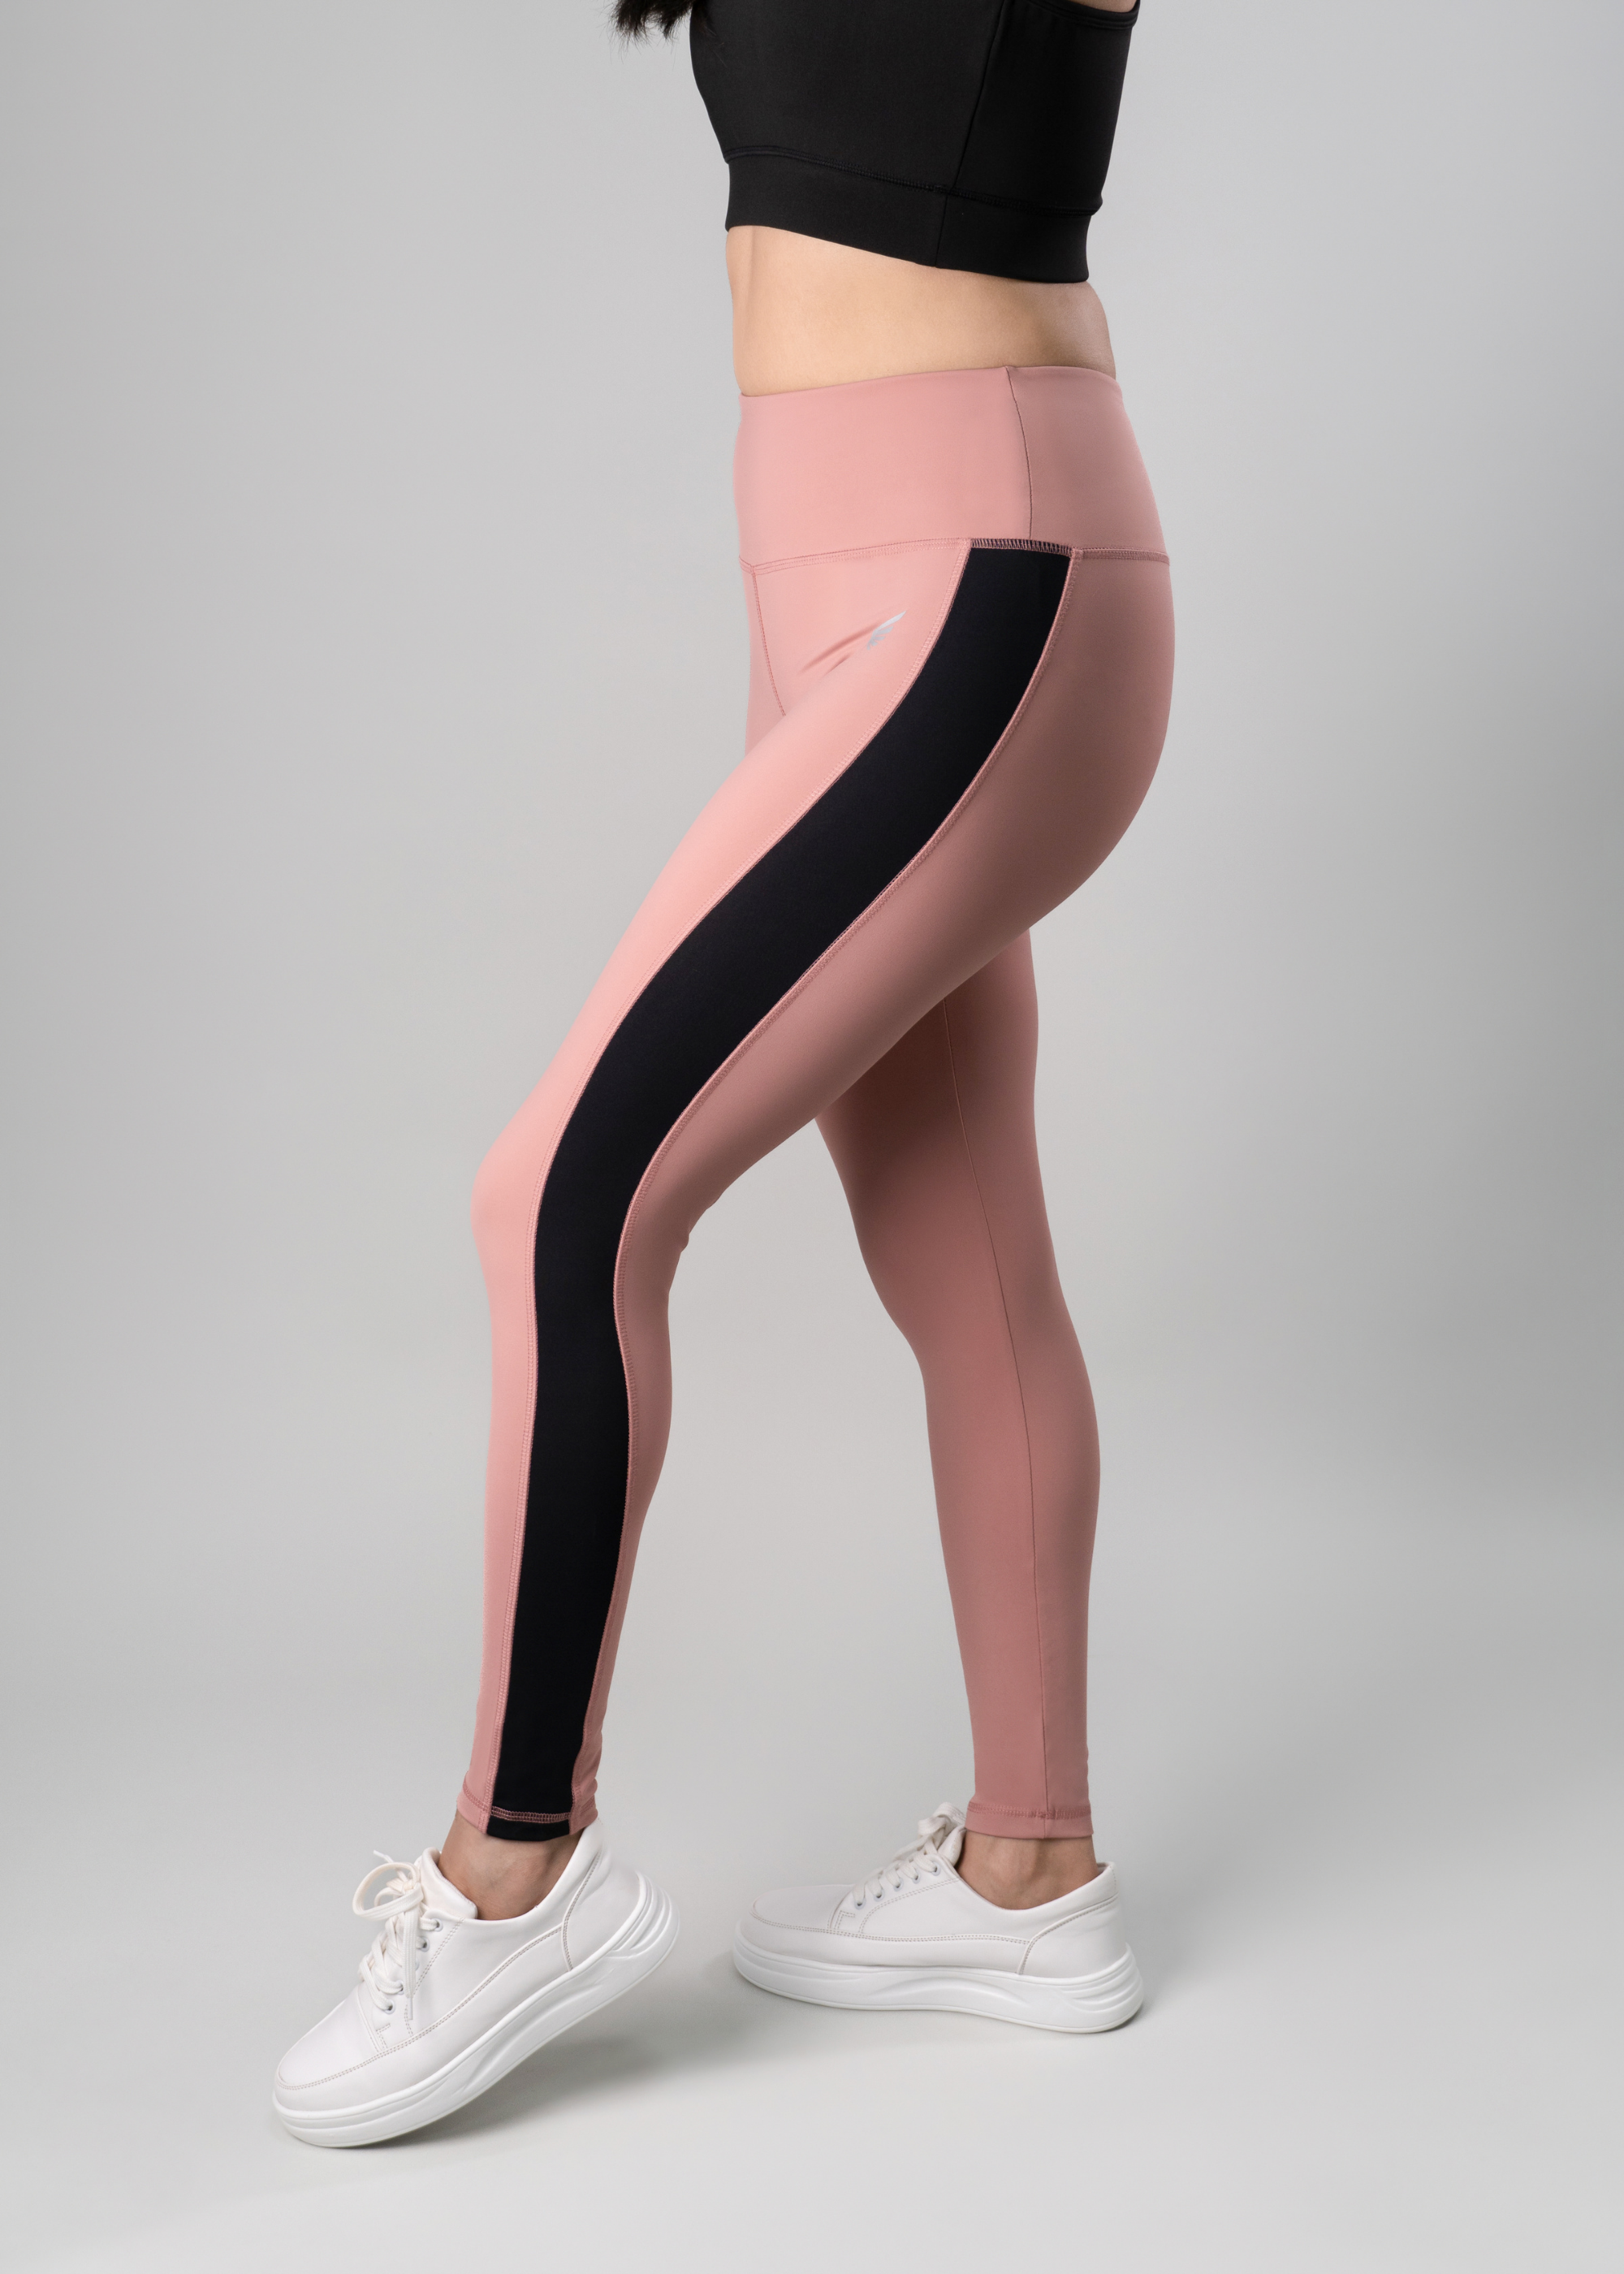 Everyday Tights for Women - Flurr